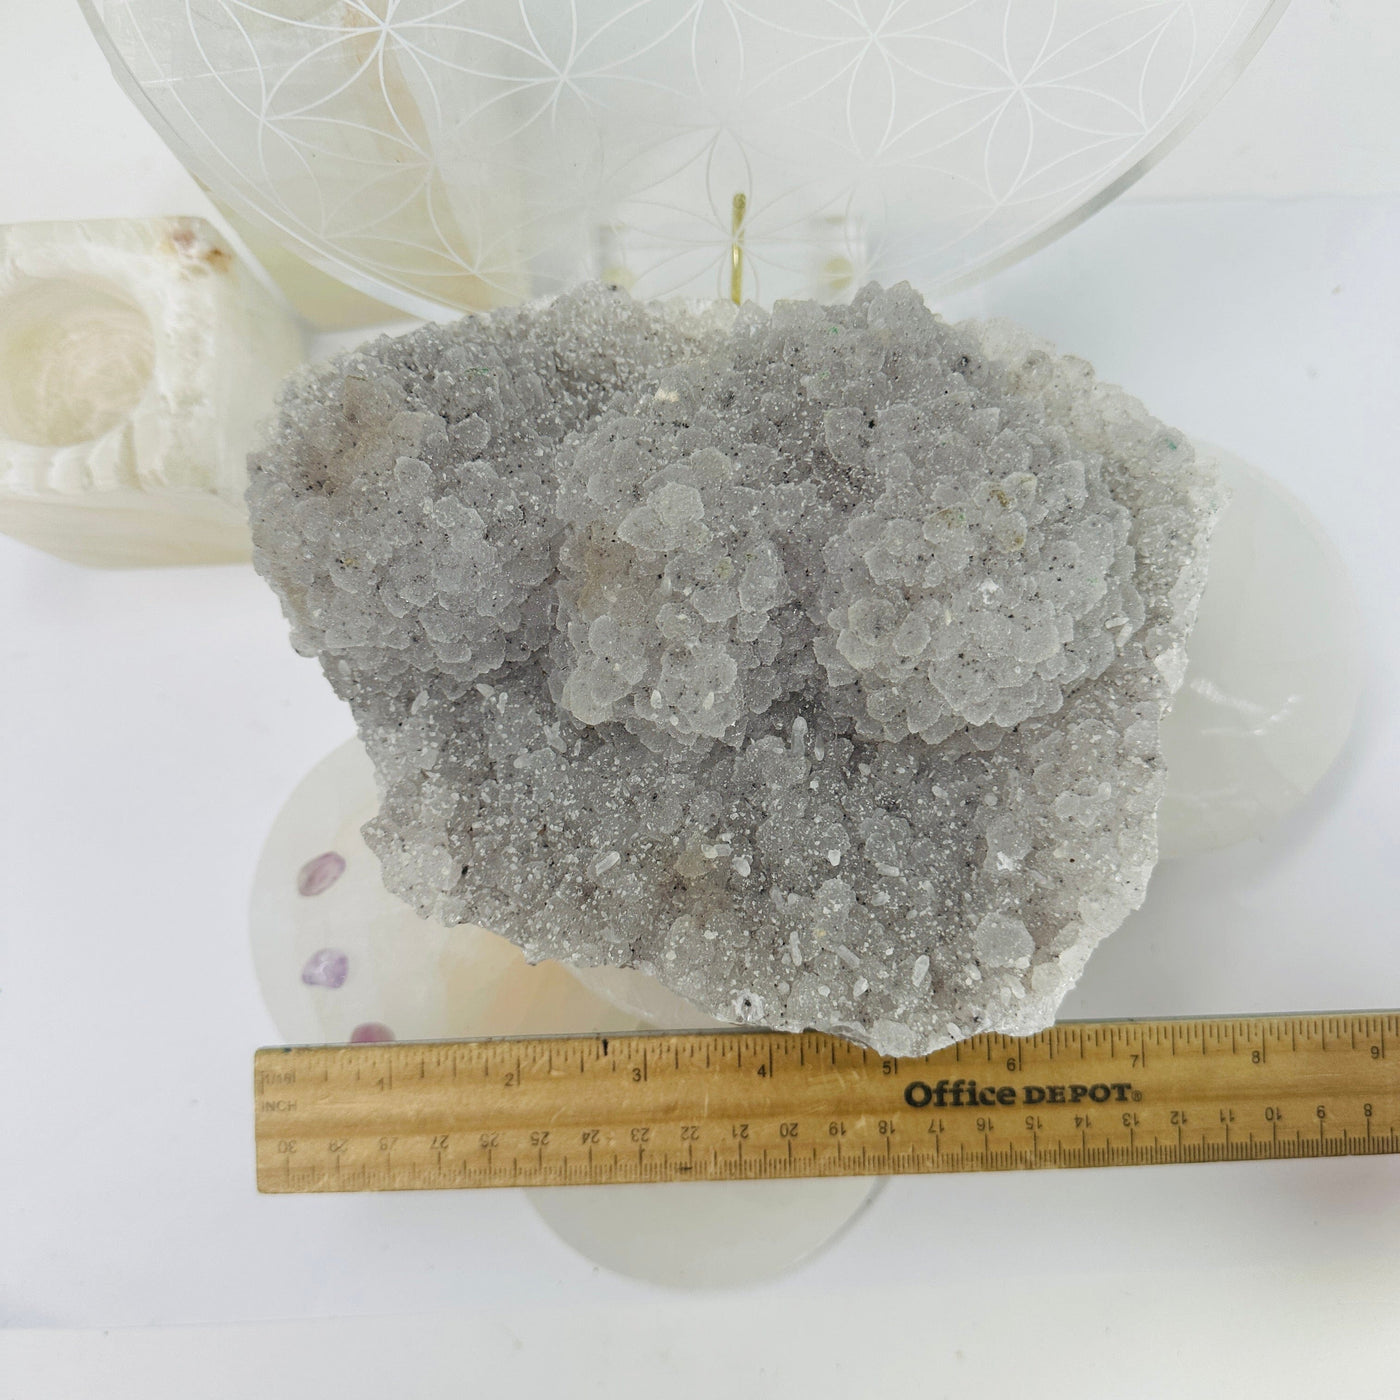 Amethyst Druzy Cluster - light purple amethyst with ruler for size reference